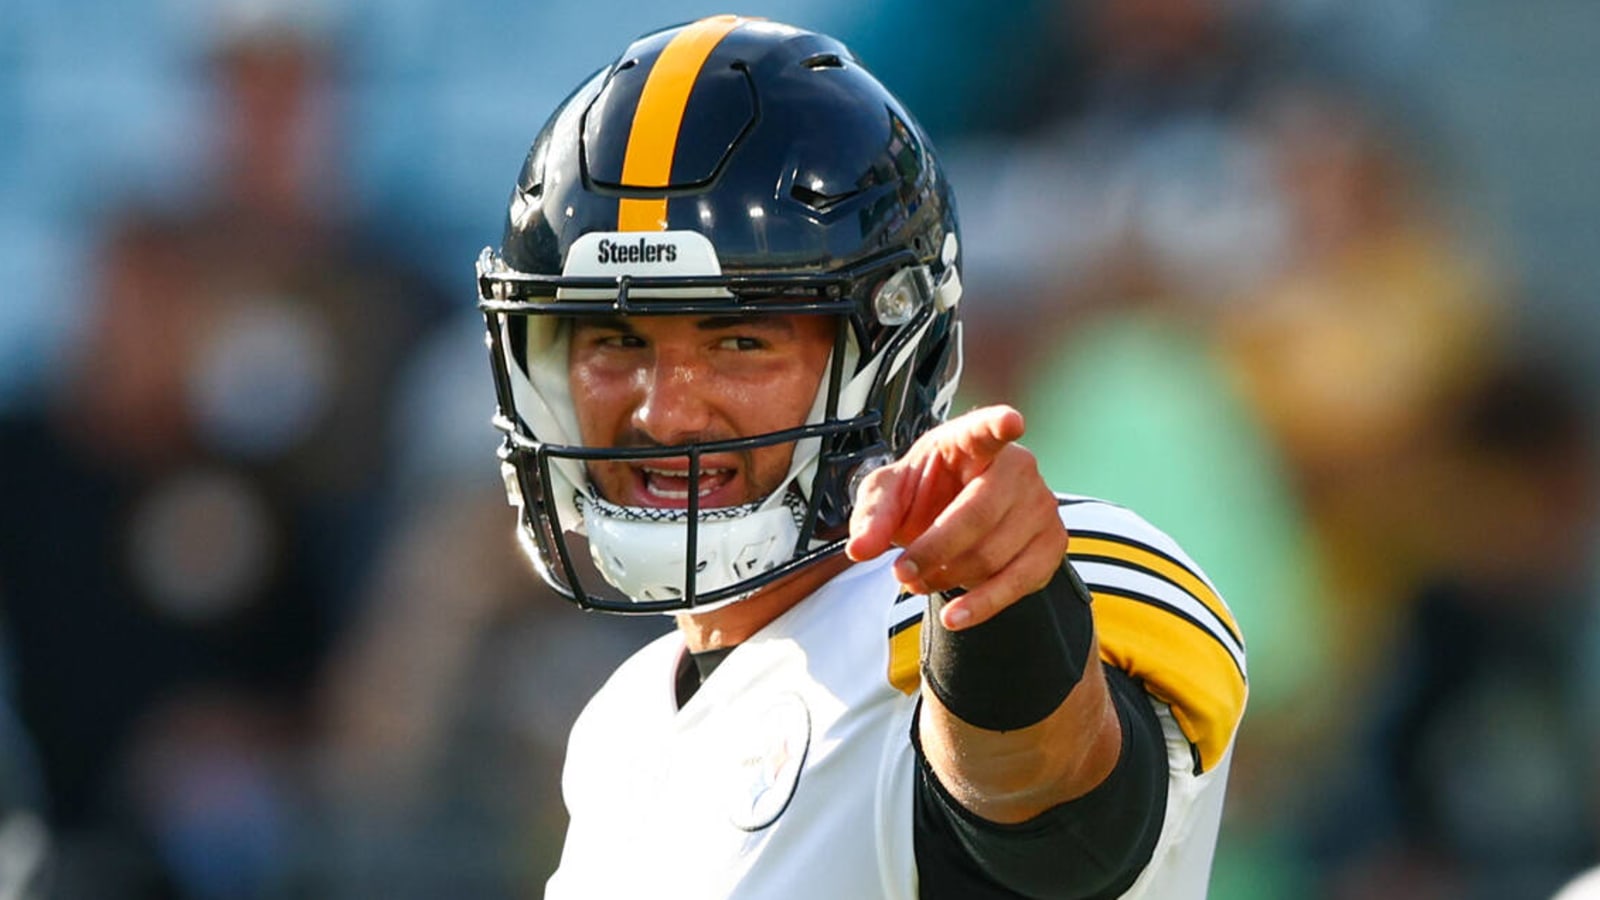 Mitchell Trubisky learned he was Steelers' starting QB last week